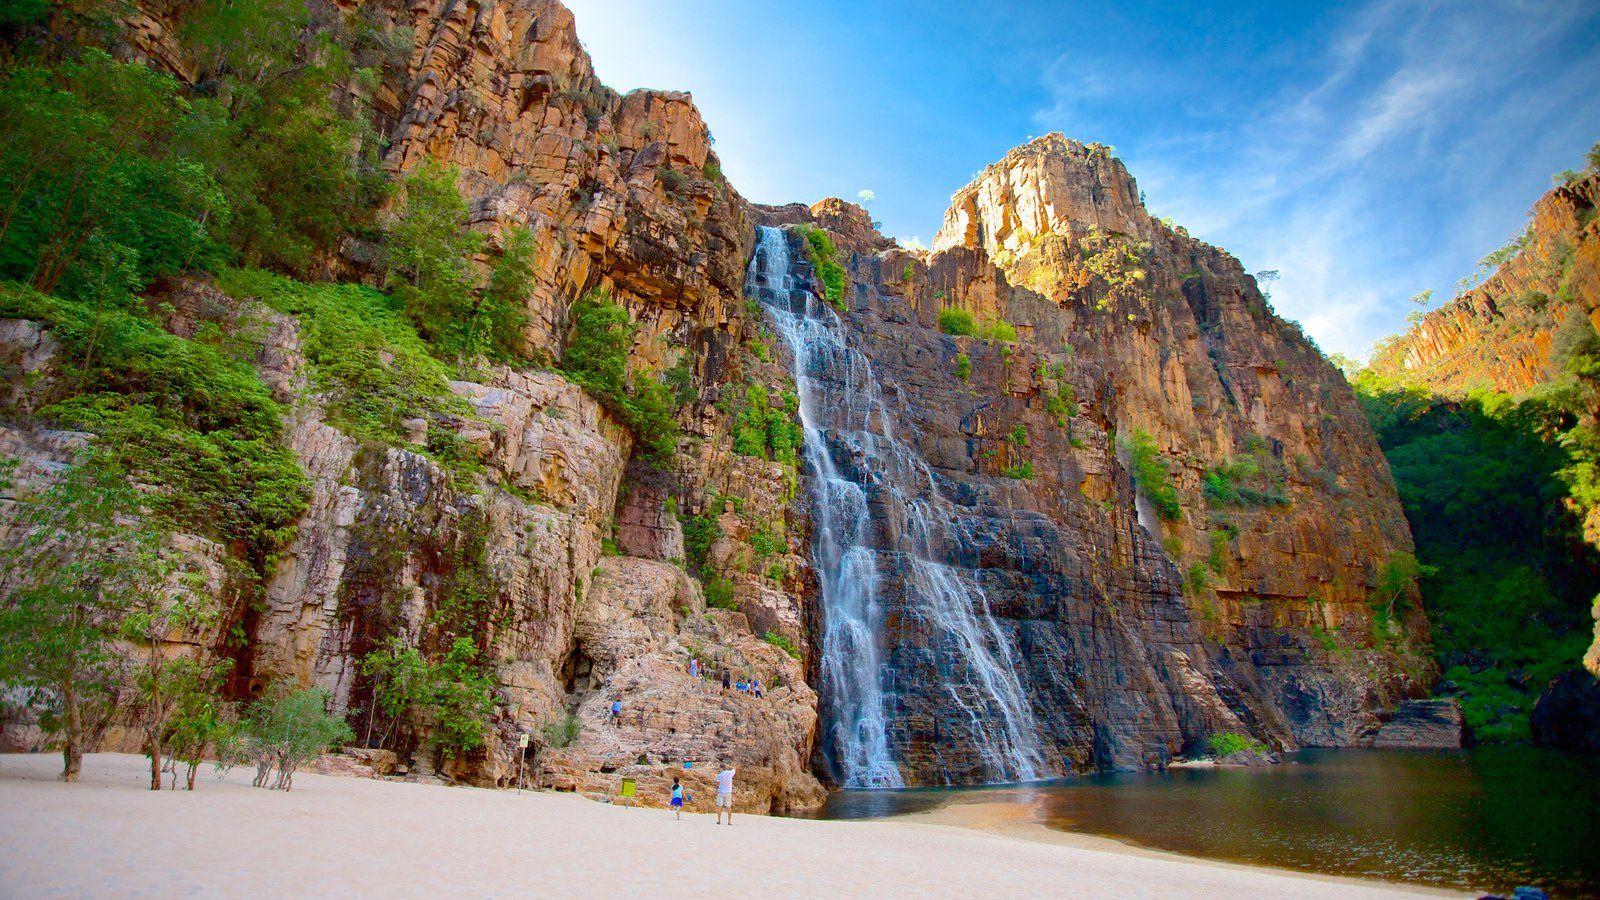 Waterfall Pictures: View Image of Kakadu National Park